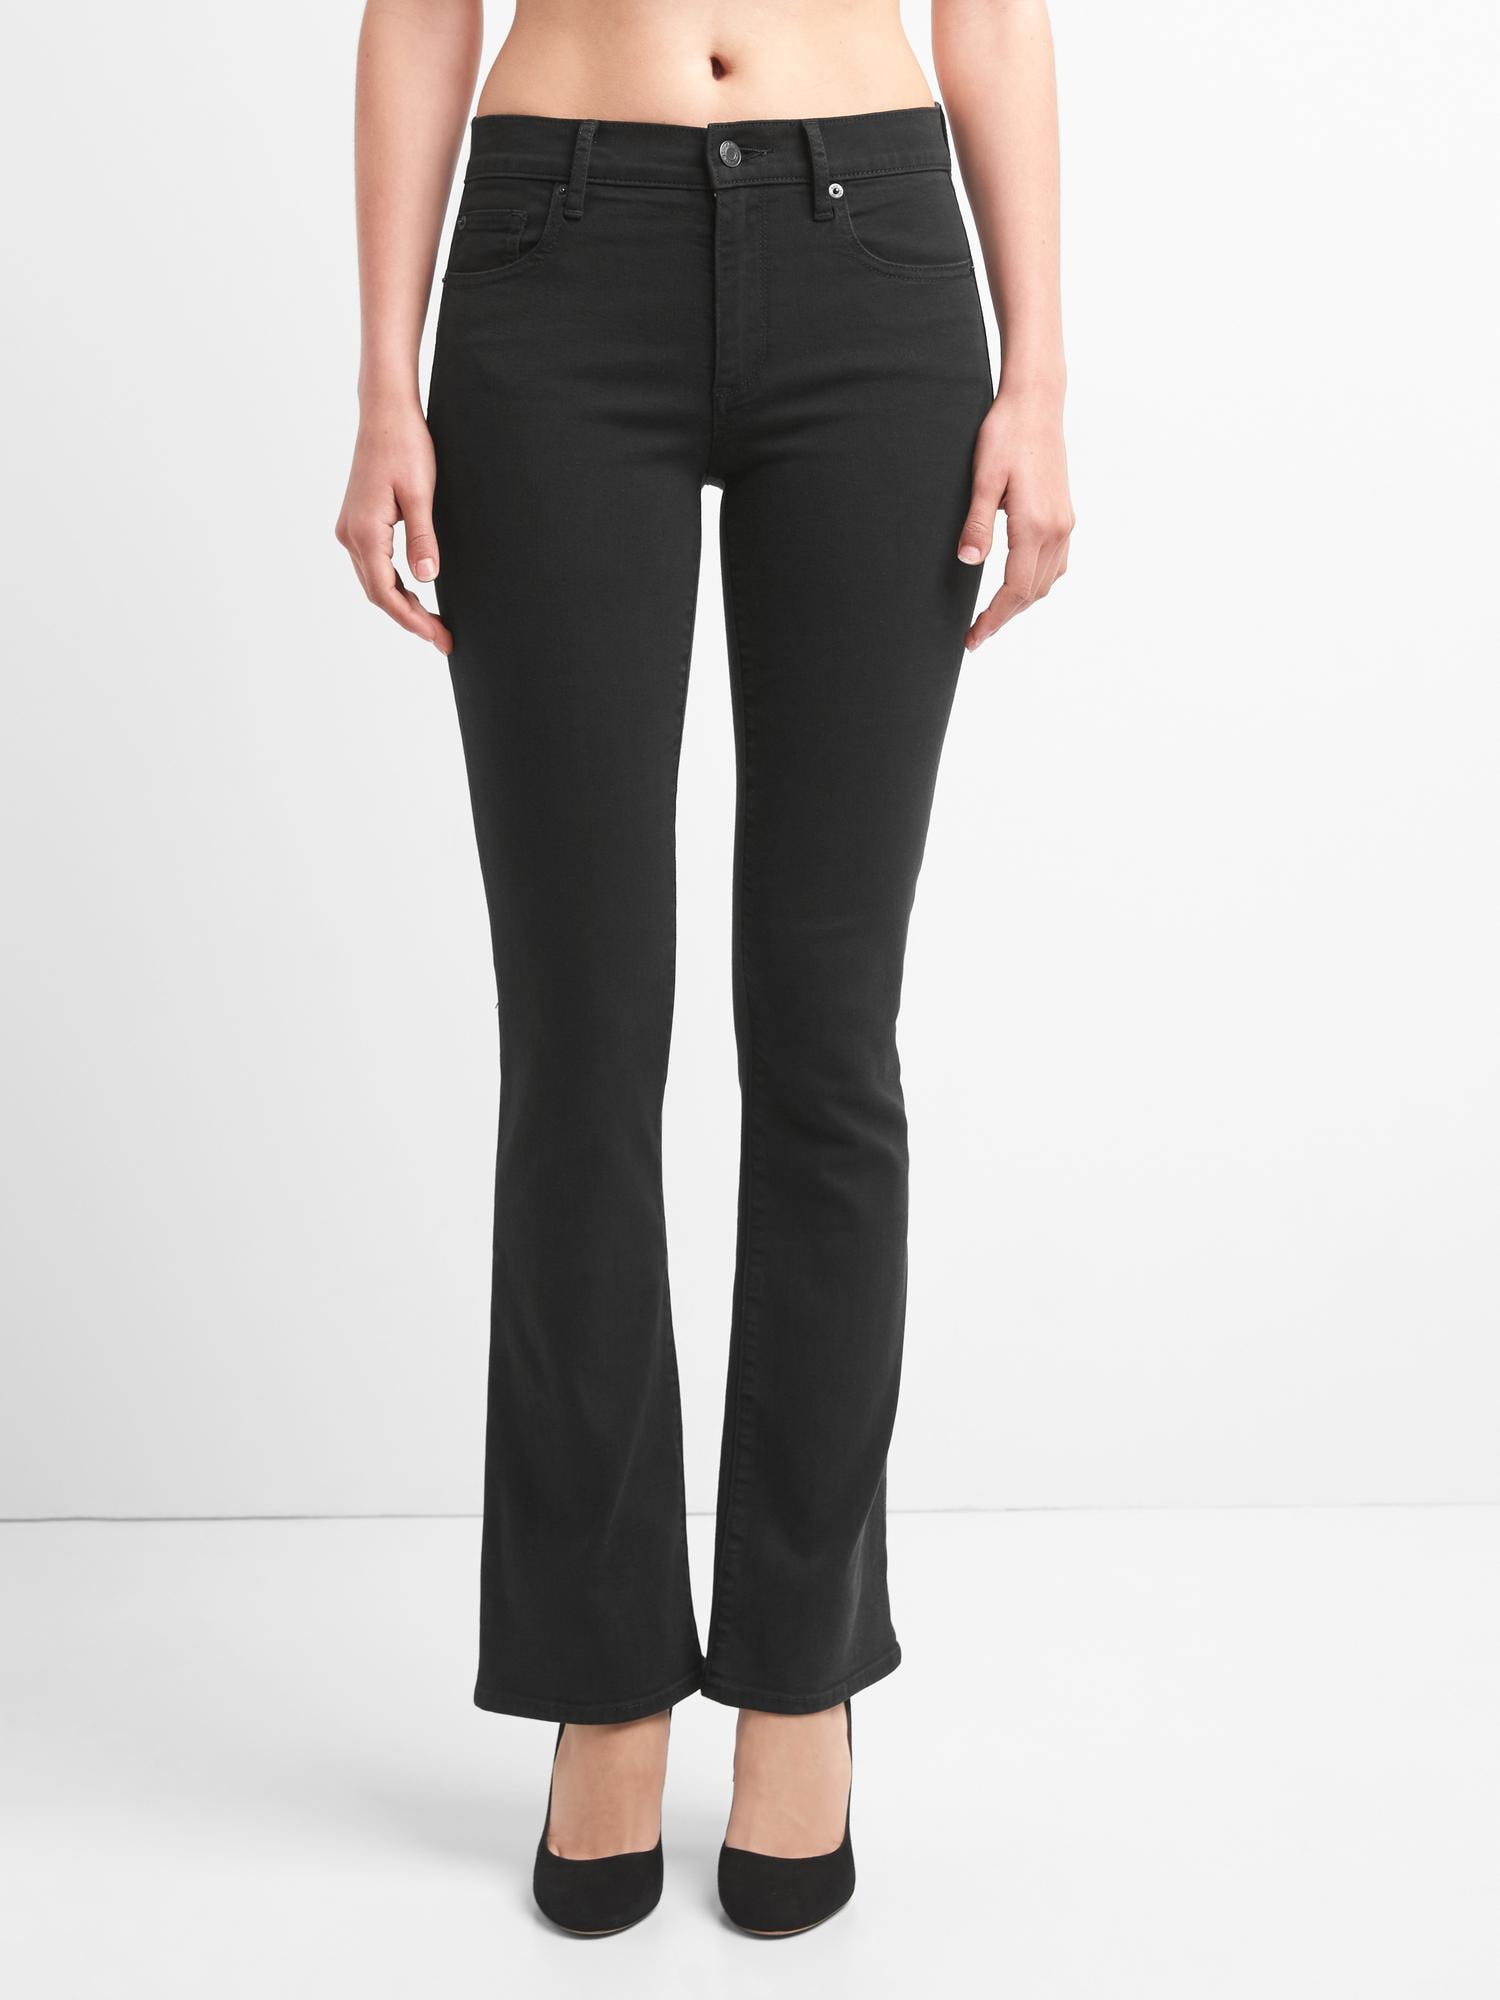 Mid rise perfect boot jeans | Gap